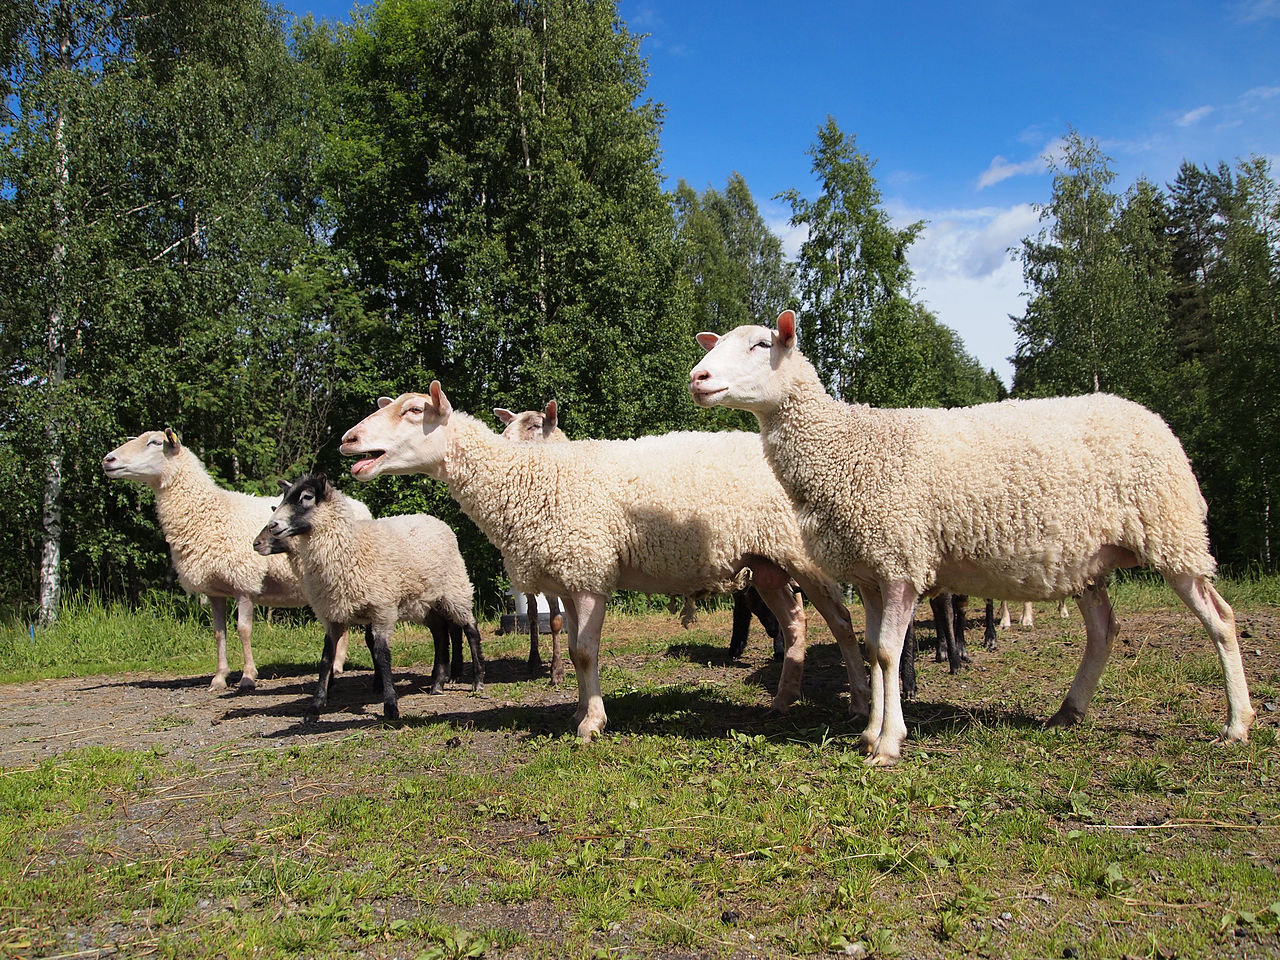 'Sheep in Pappilanvuori district, Jyväskylä' - photo found in Wiki Commons and attributable to Tiia Monto